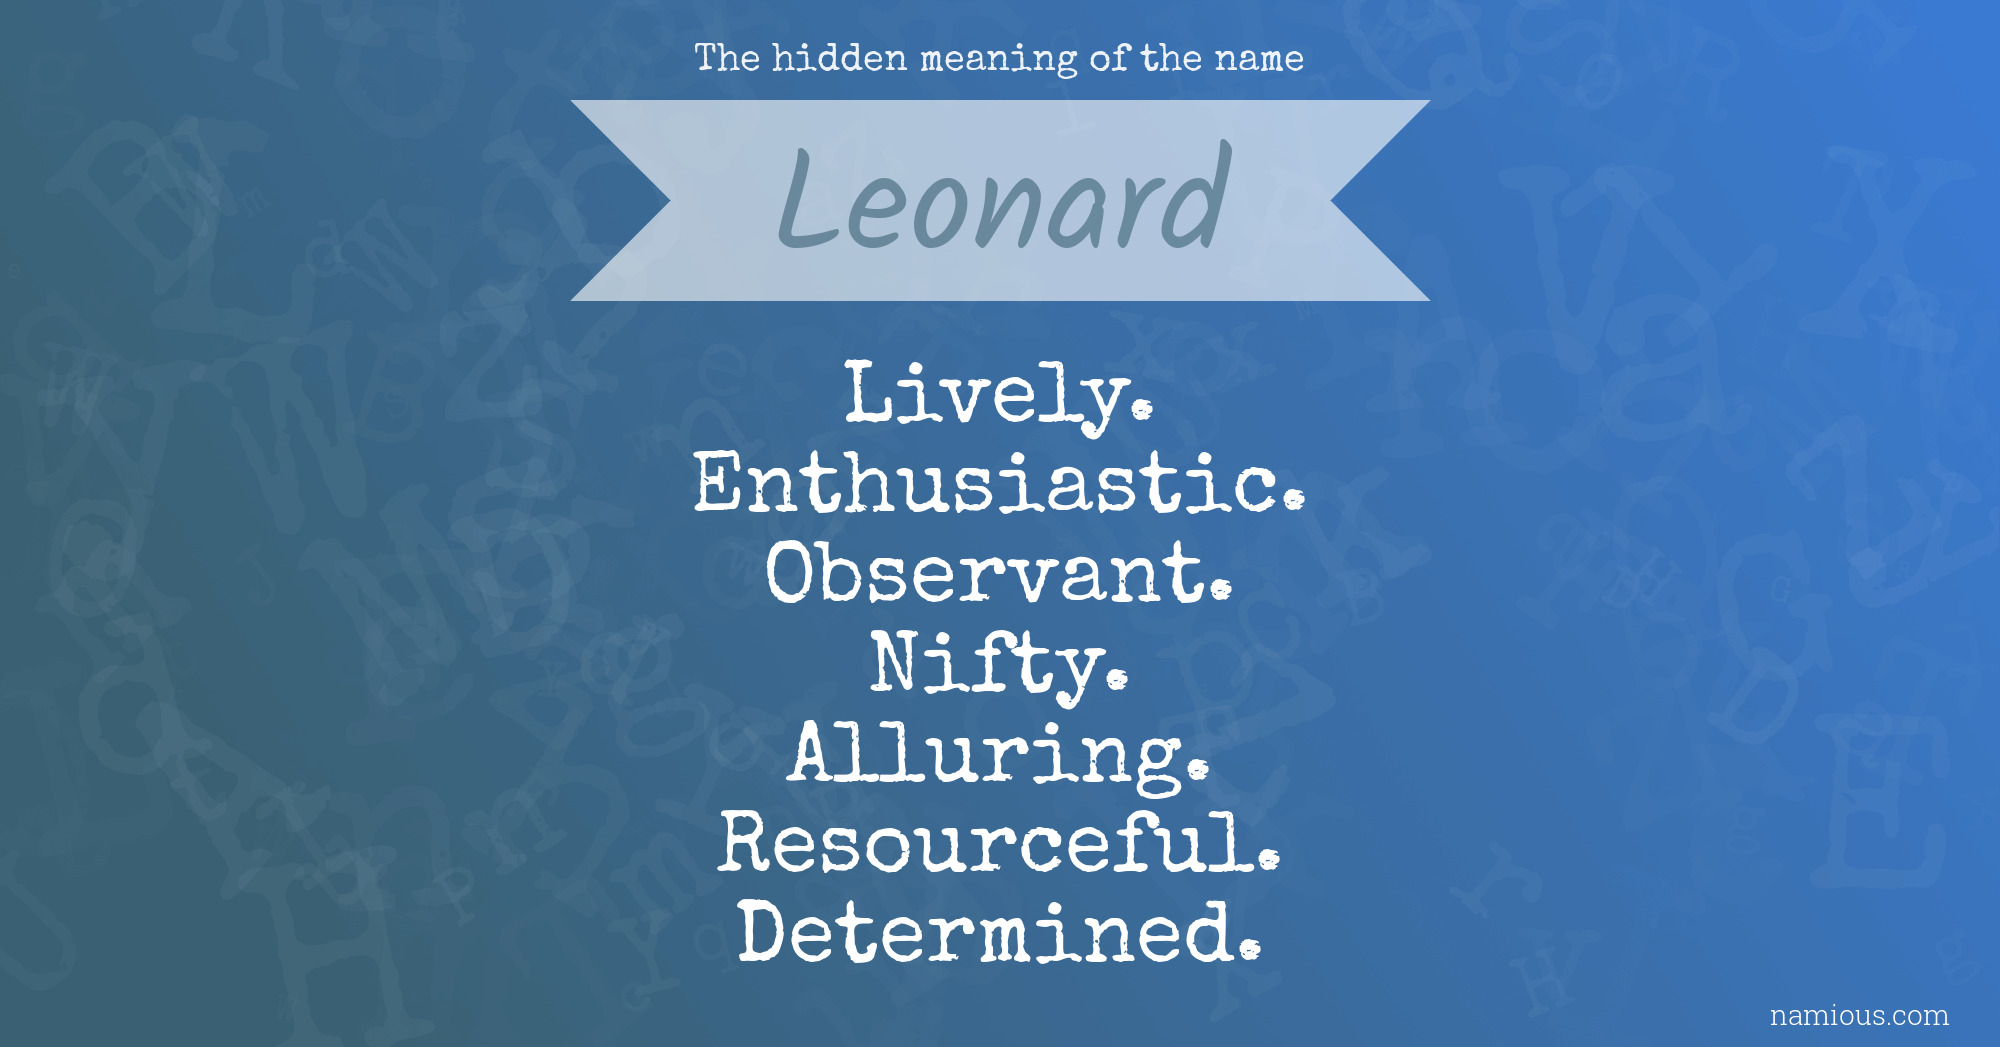 The hidden meaning of the name Leonard